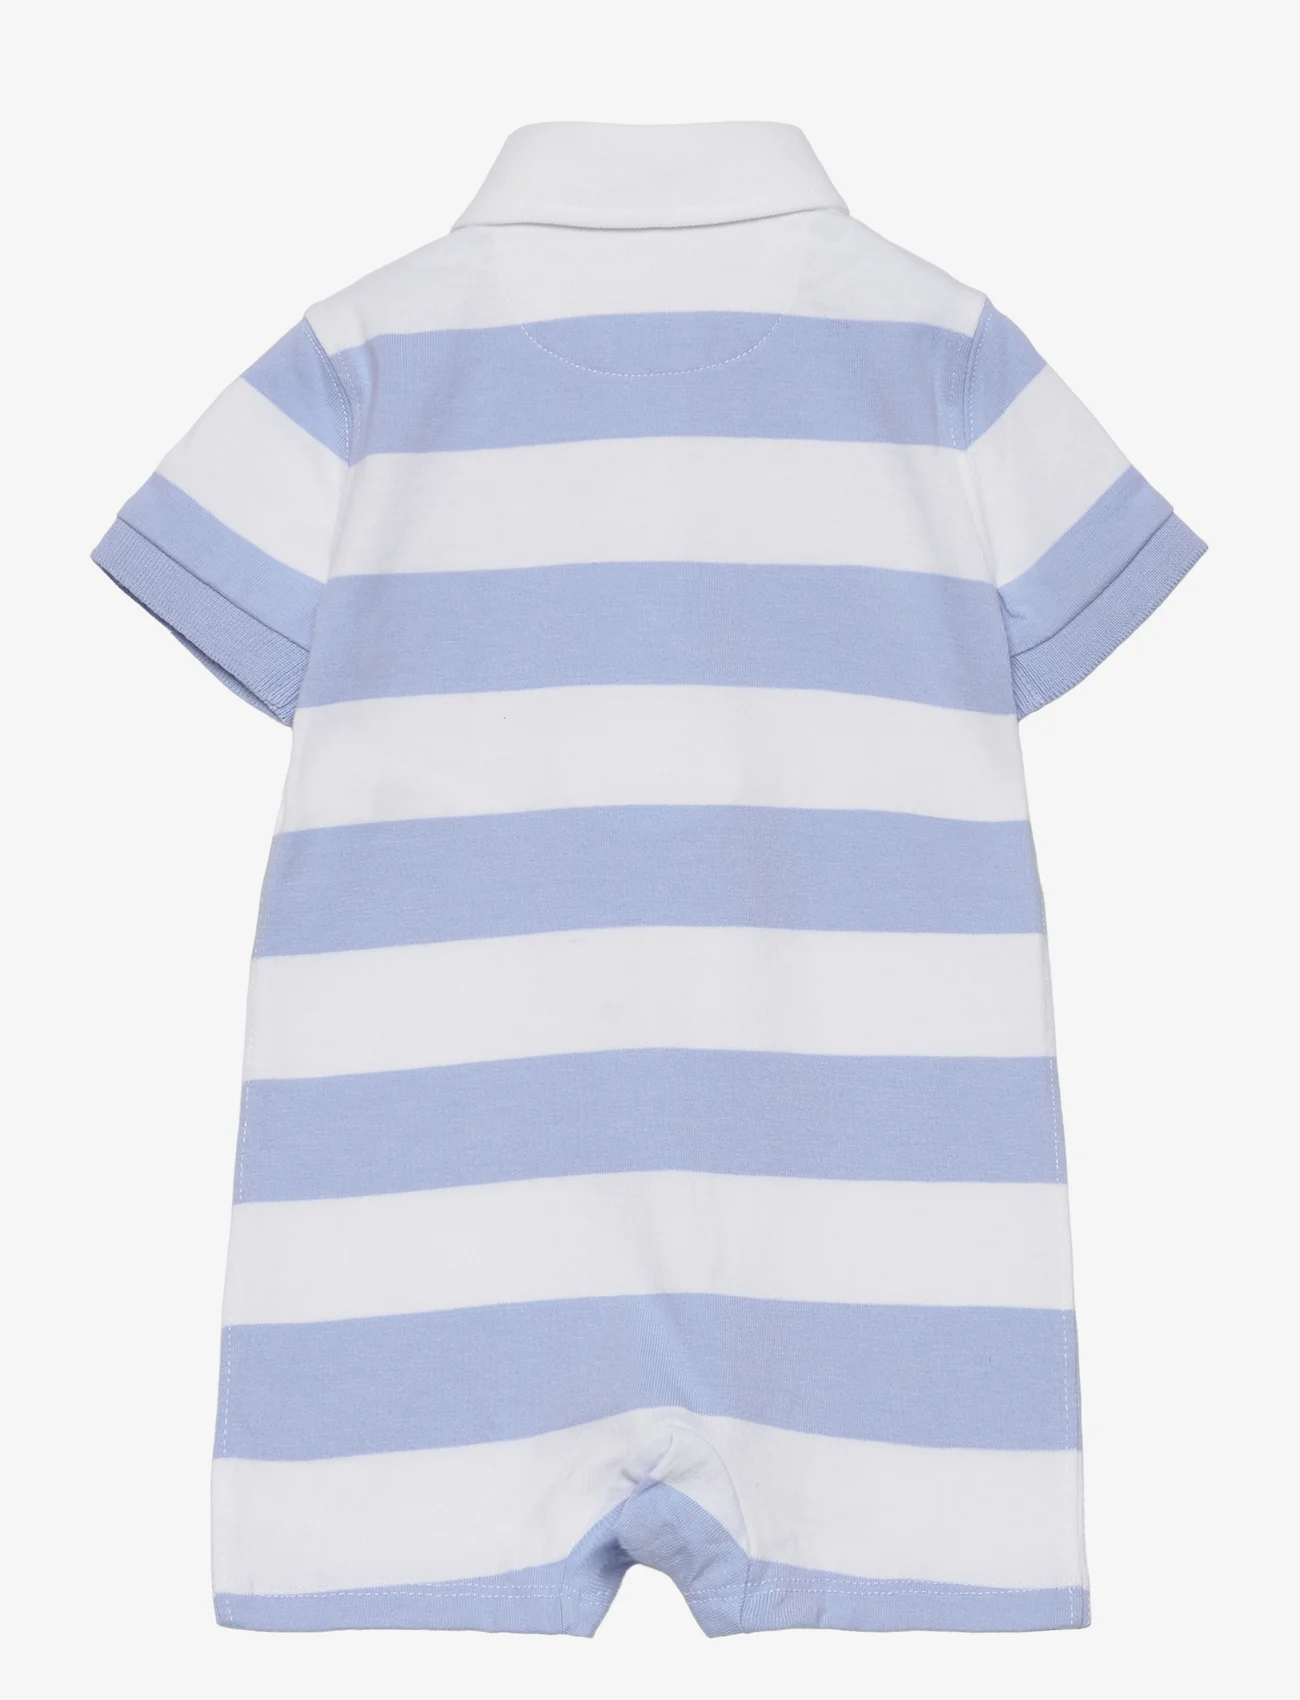 Ralph Lauren Baby - Striped Cotton Rugby Shortall - short-sleeved - office blue/white - 1